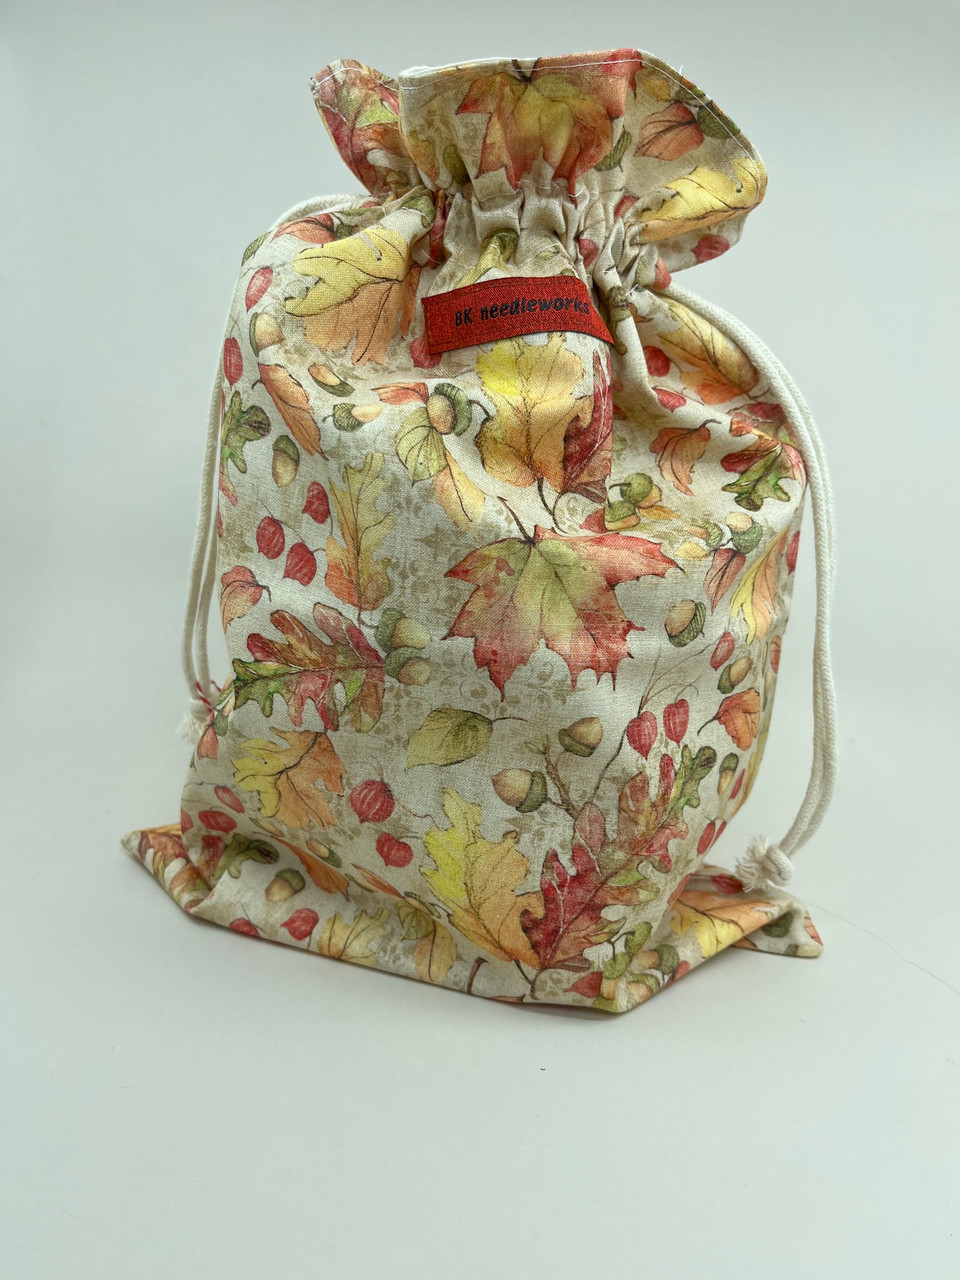 Small drawstring project bag by BK Needleworks at The Endless Skein